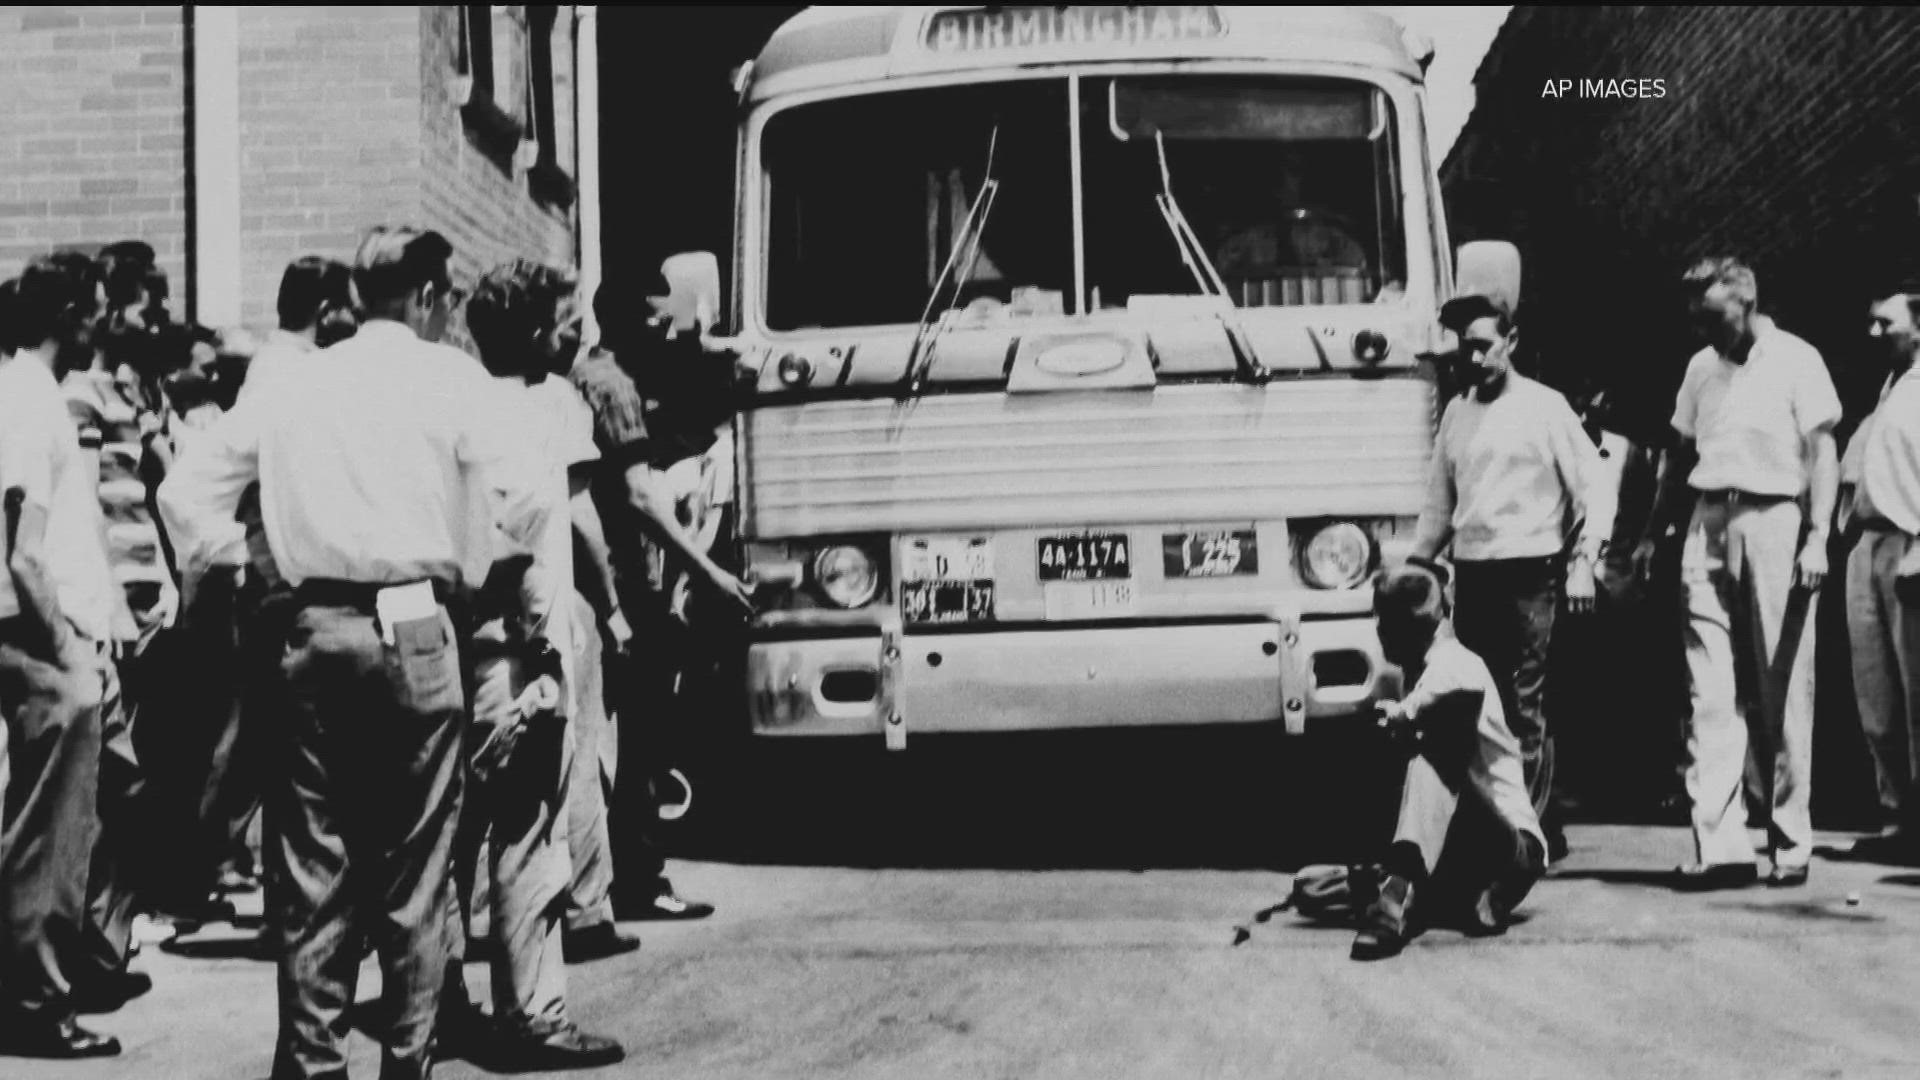 Georgia Congressman Hank Johnson introduced a bipartisan resolution to answer the Freedom Riders the Congressional Gold Medal.